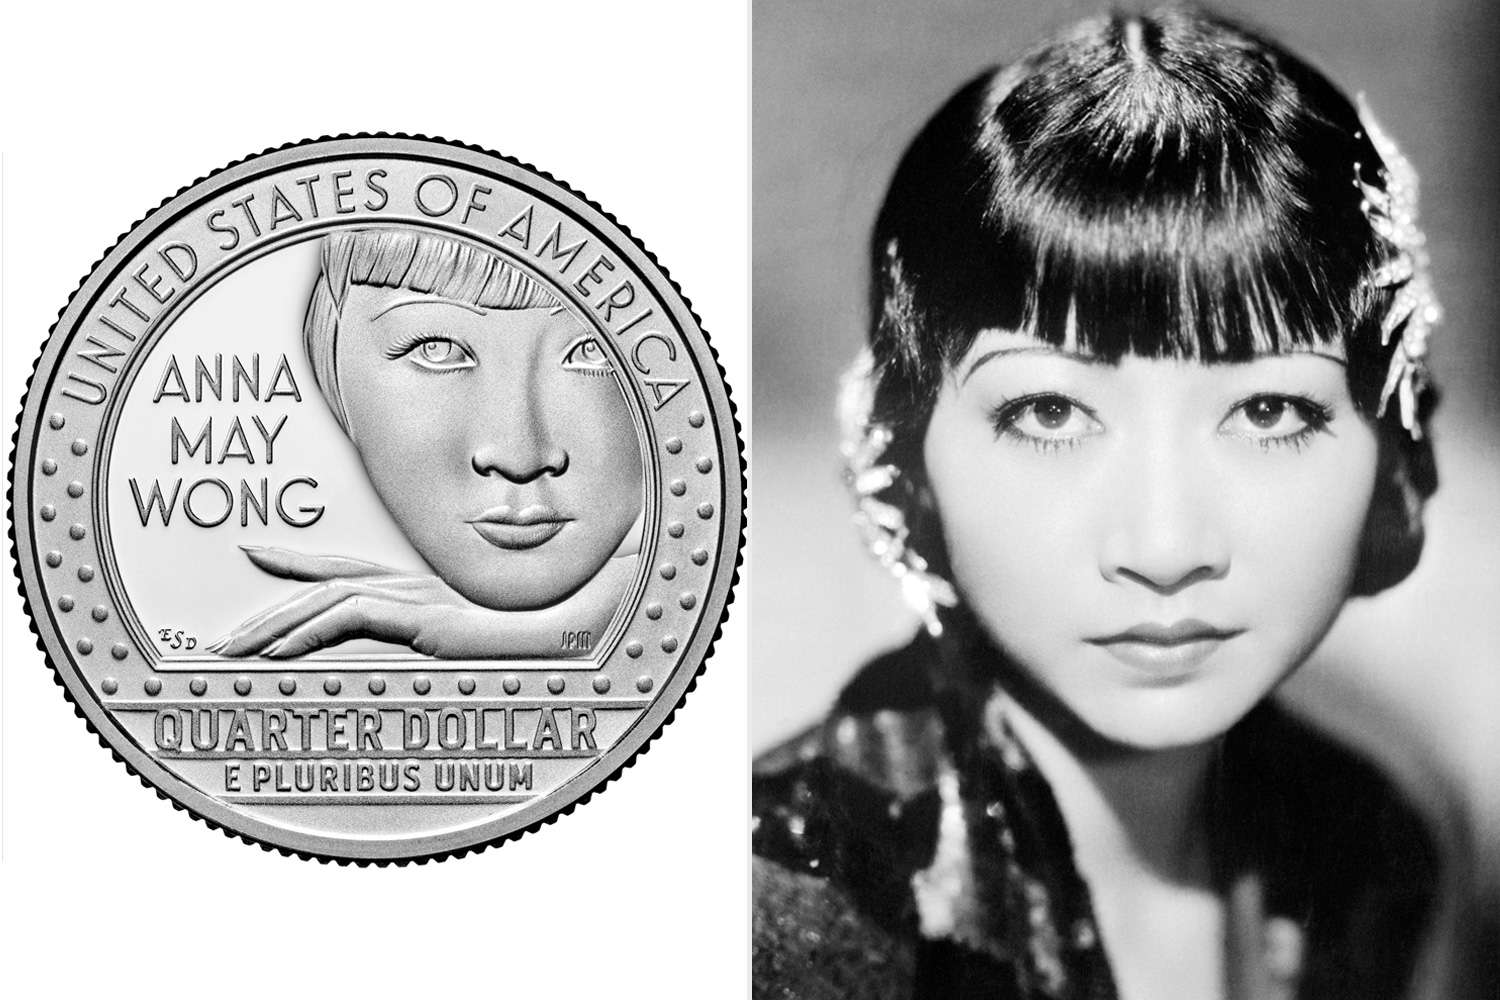 Anna May Wong will make history as the first Asian American on US currency